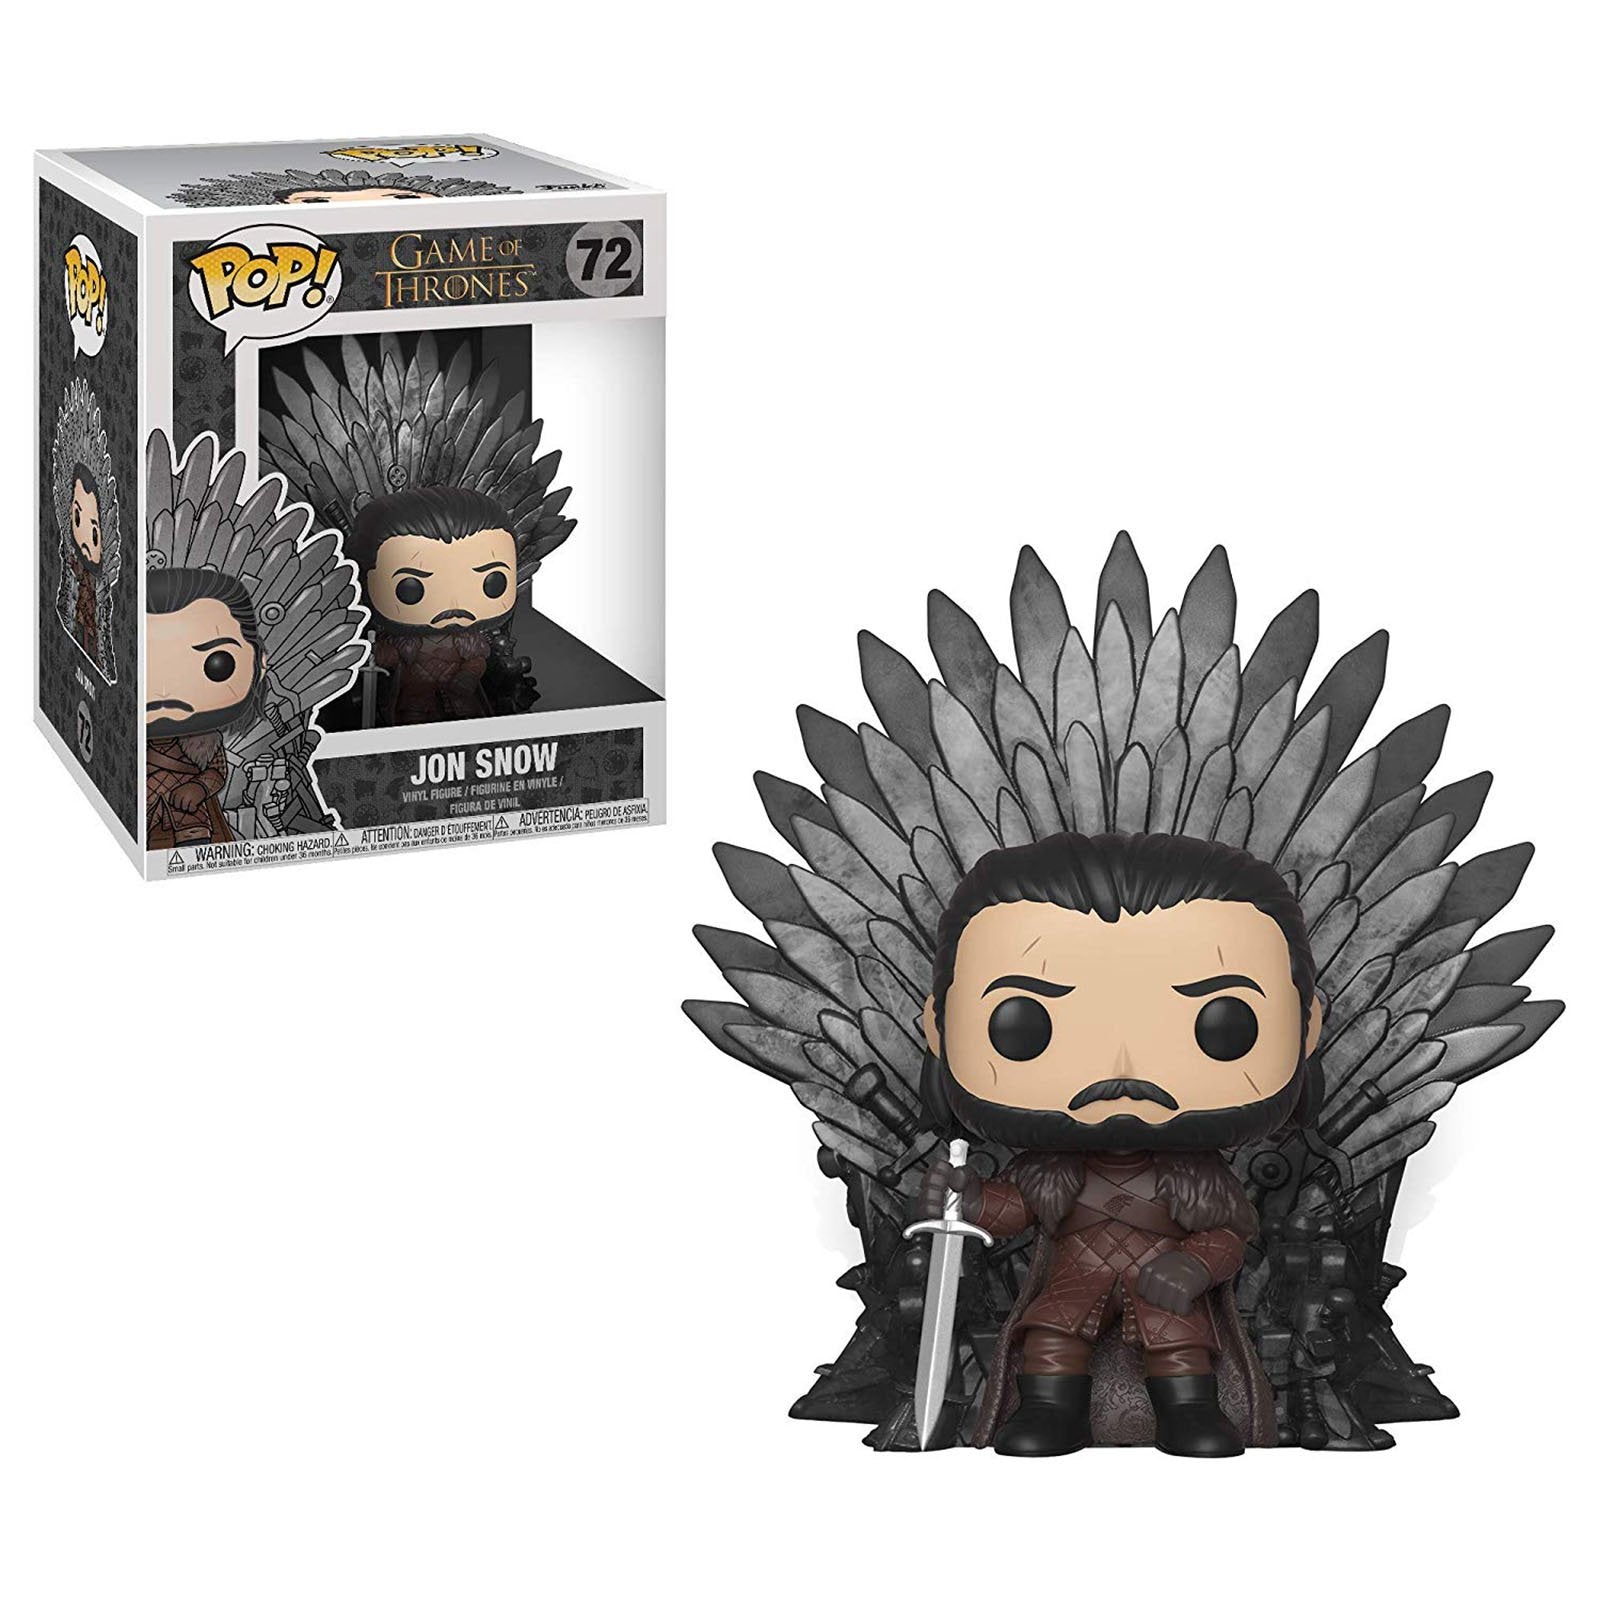 game of thrones action figure set